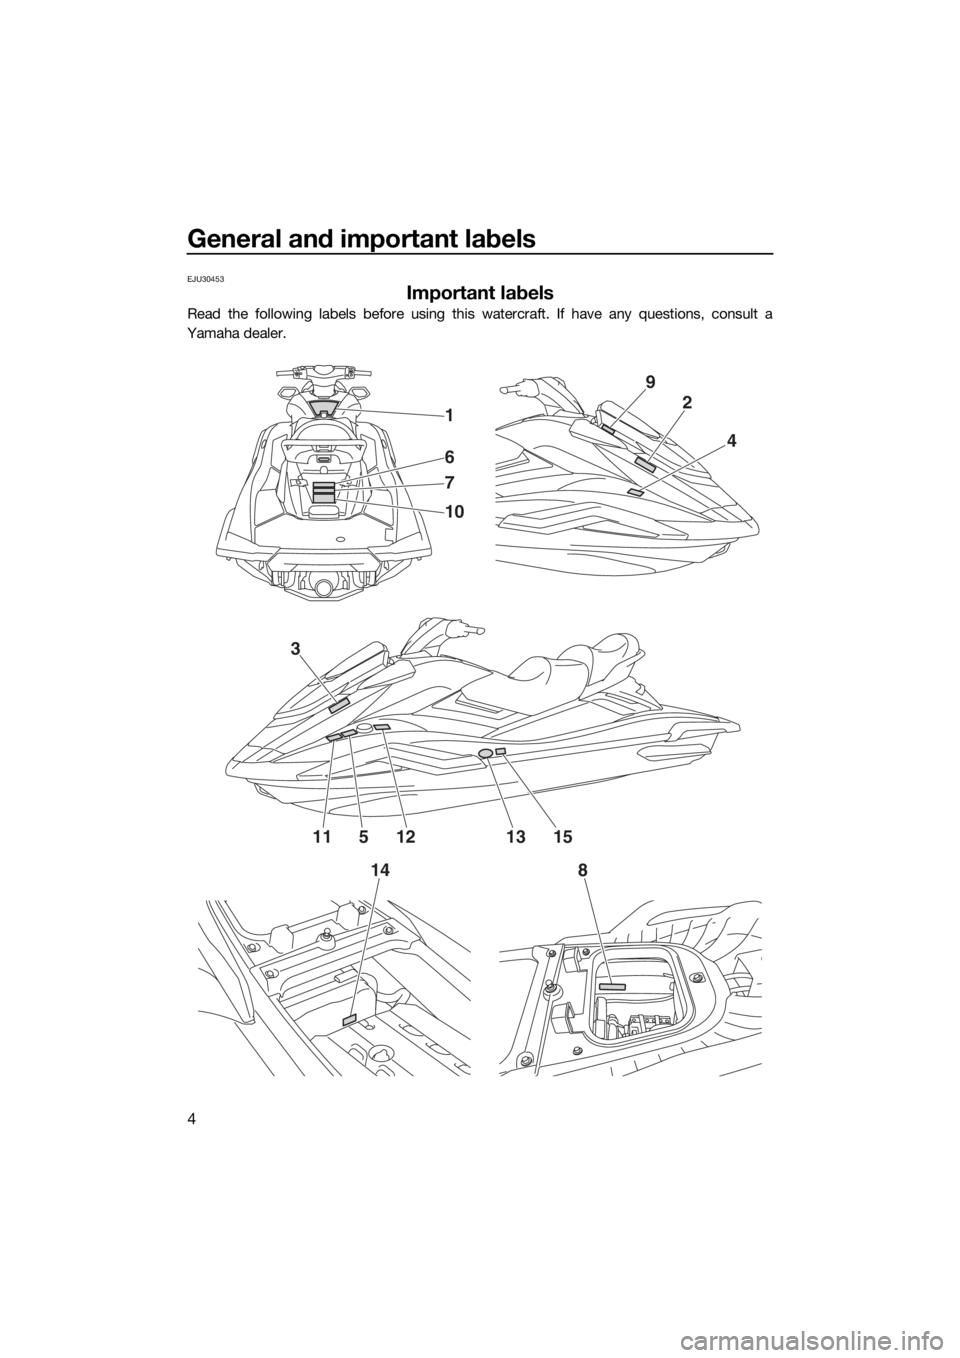 YAMAHA FX SVHO 2019  Owners Manual General and important labels
4
EJU30453
Important labels
Read the following labels before using this watercraft. If have any questions, consult a
Yamaha dealer.
1
3
148
115121513
9
2
46
7
10
UF3X70E0.